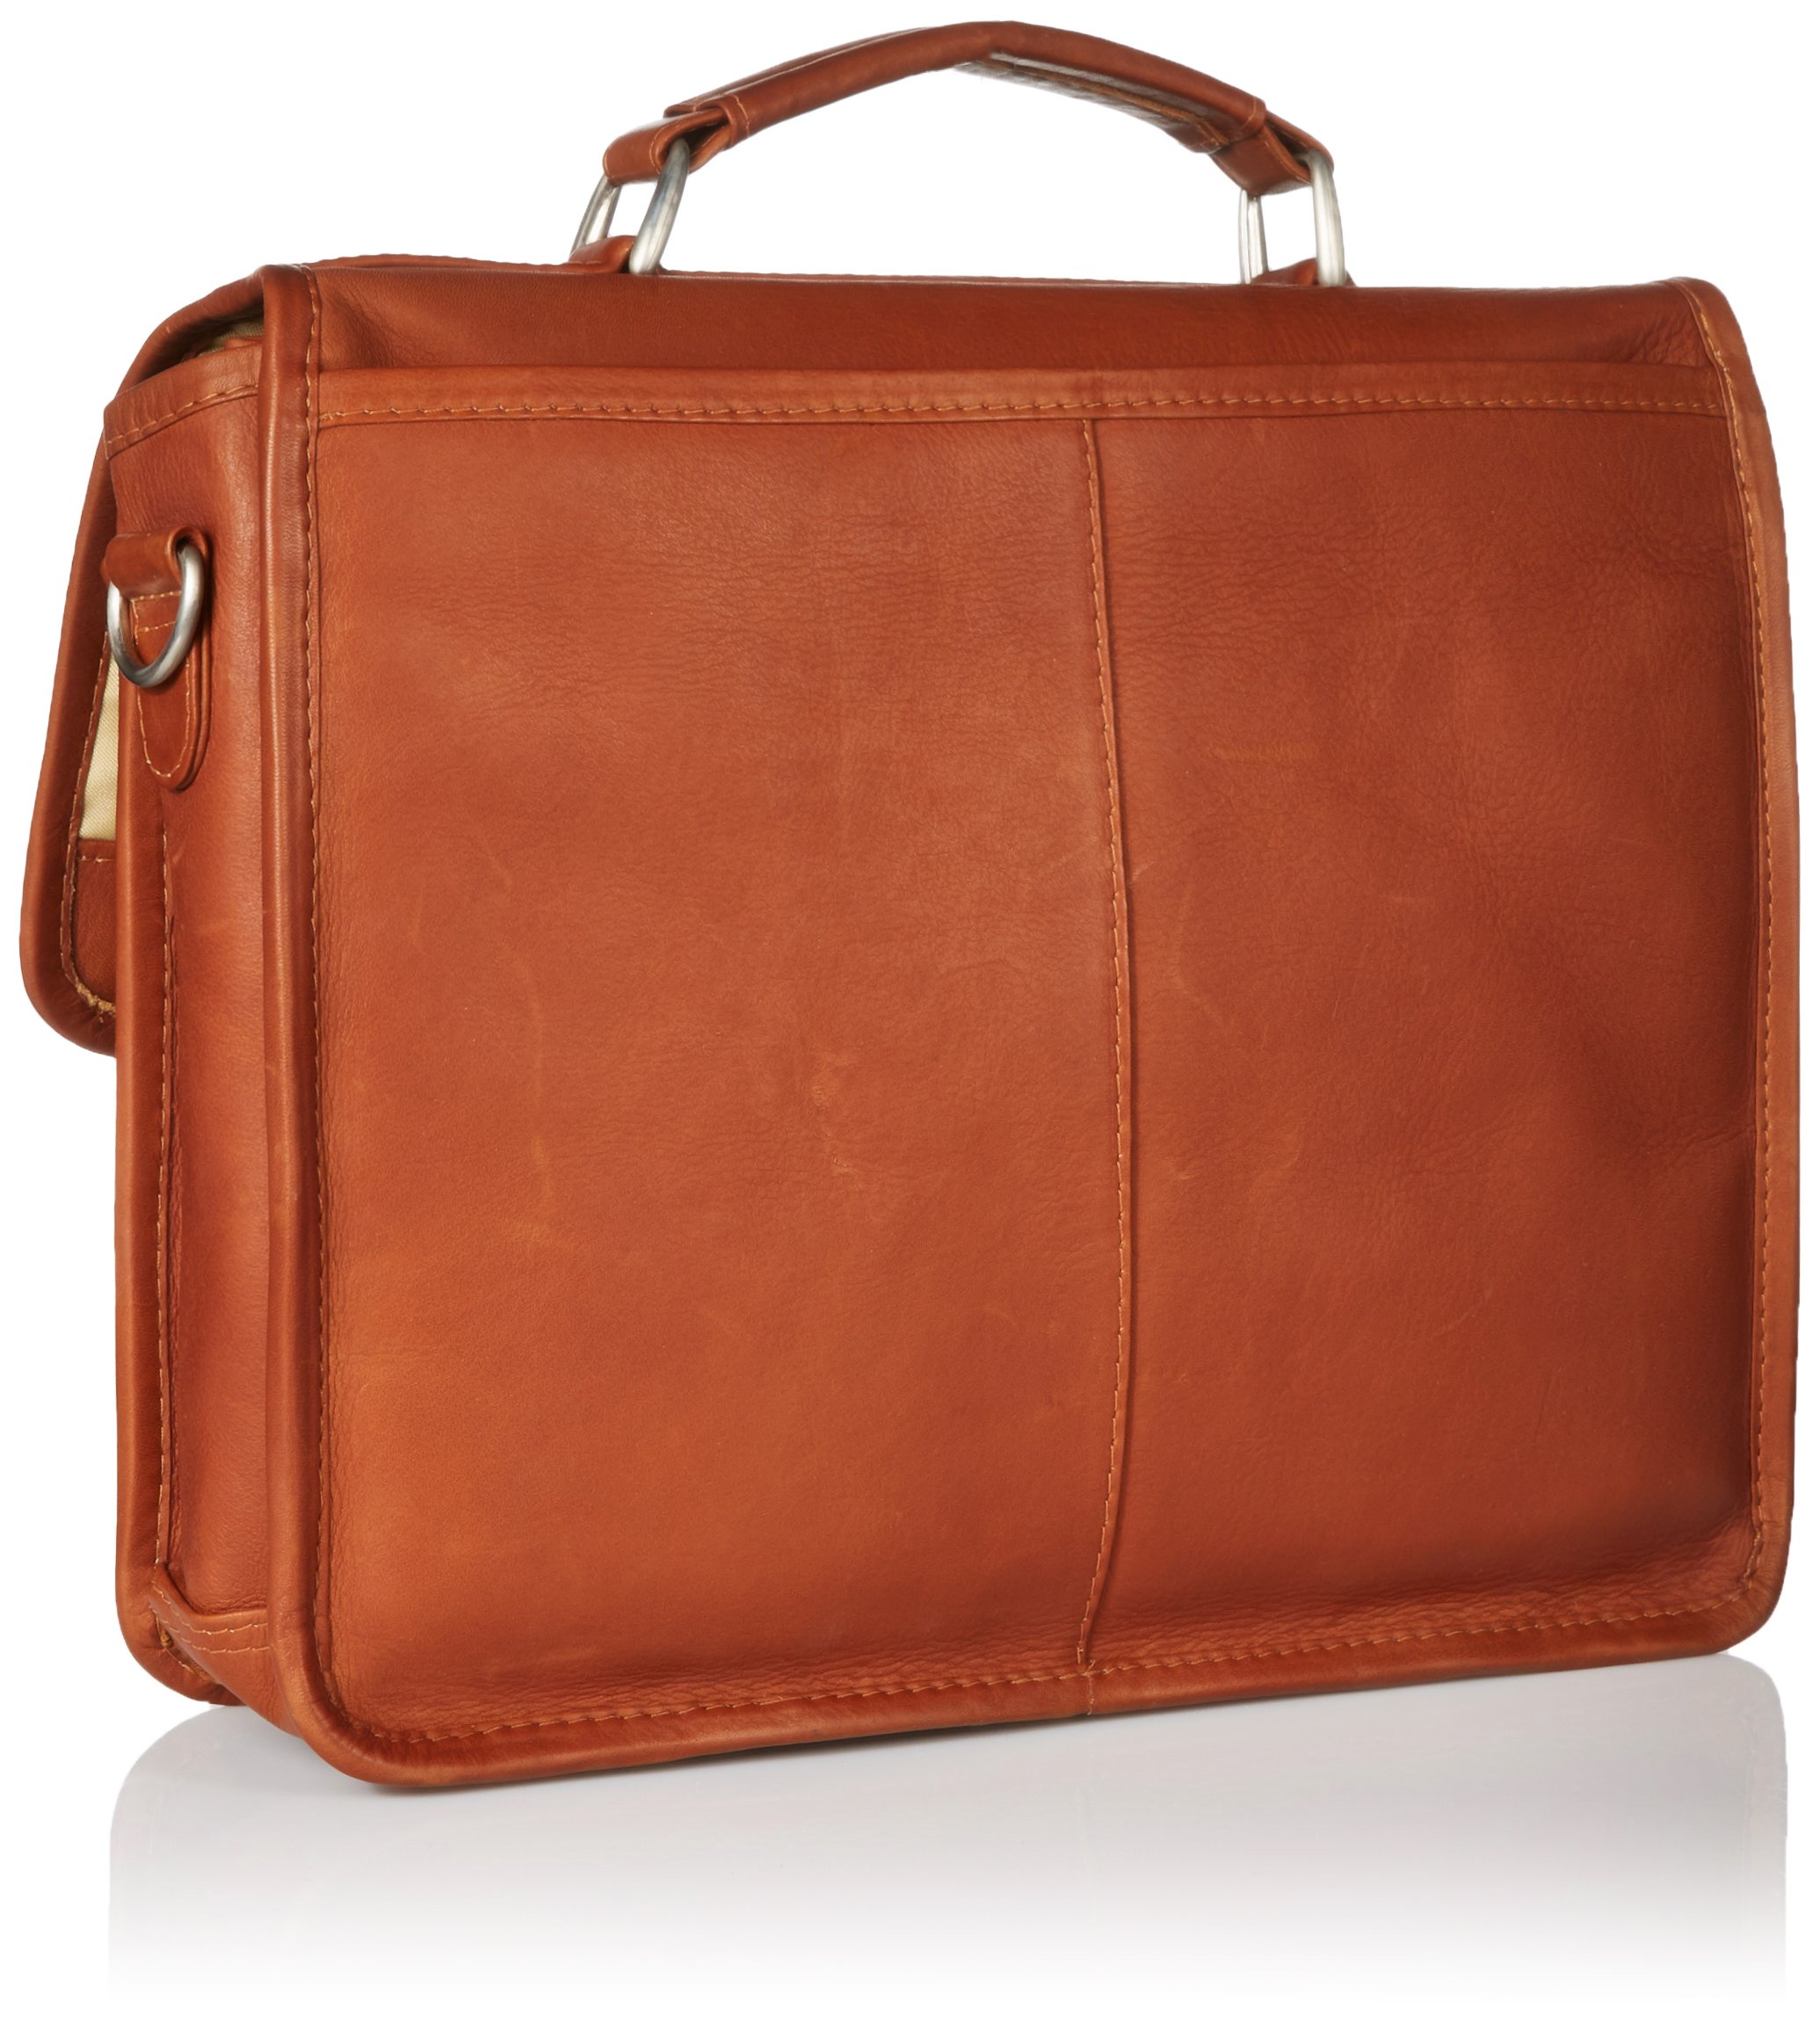 Piel Leather Small Flap-Over Laptop/Tablet Brief, Saddle, One Size